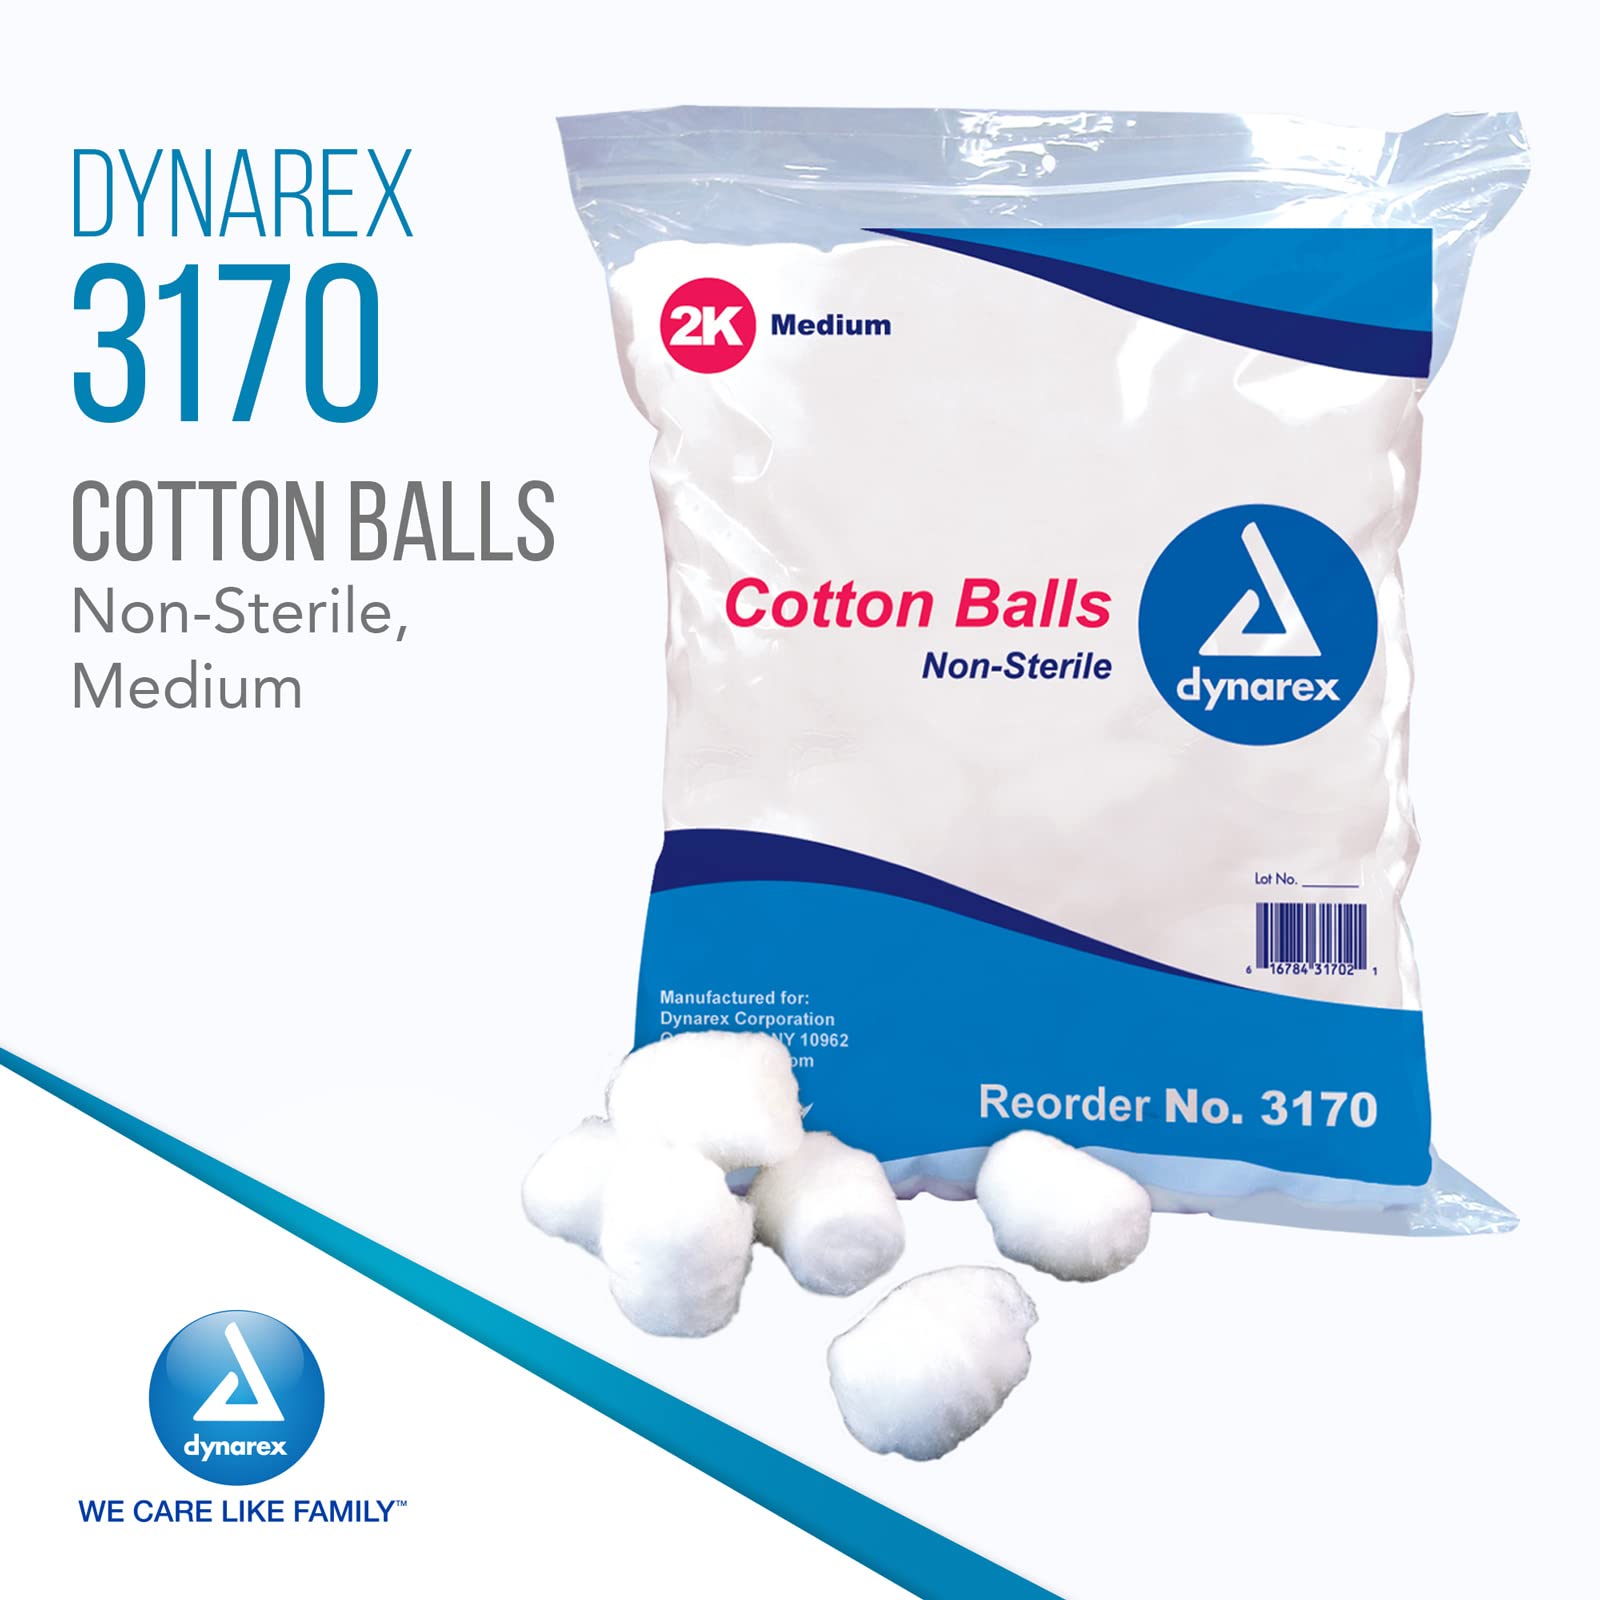 Dynarex Cotton Balls, Non-Sterile and Medium, Latex-Free and Absorbent, For Skin Cleansing, Crafts, & as Makeup Remover, Ships as 2 Bags of 2000 Cotton Balls Each, 1 Case of 4000 Dynarex Cotton Balls